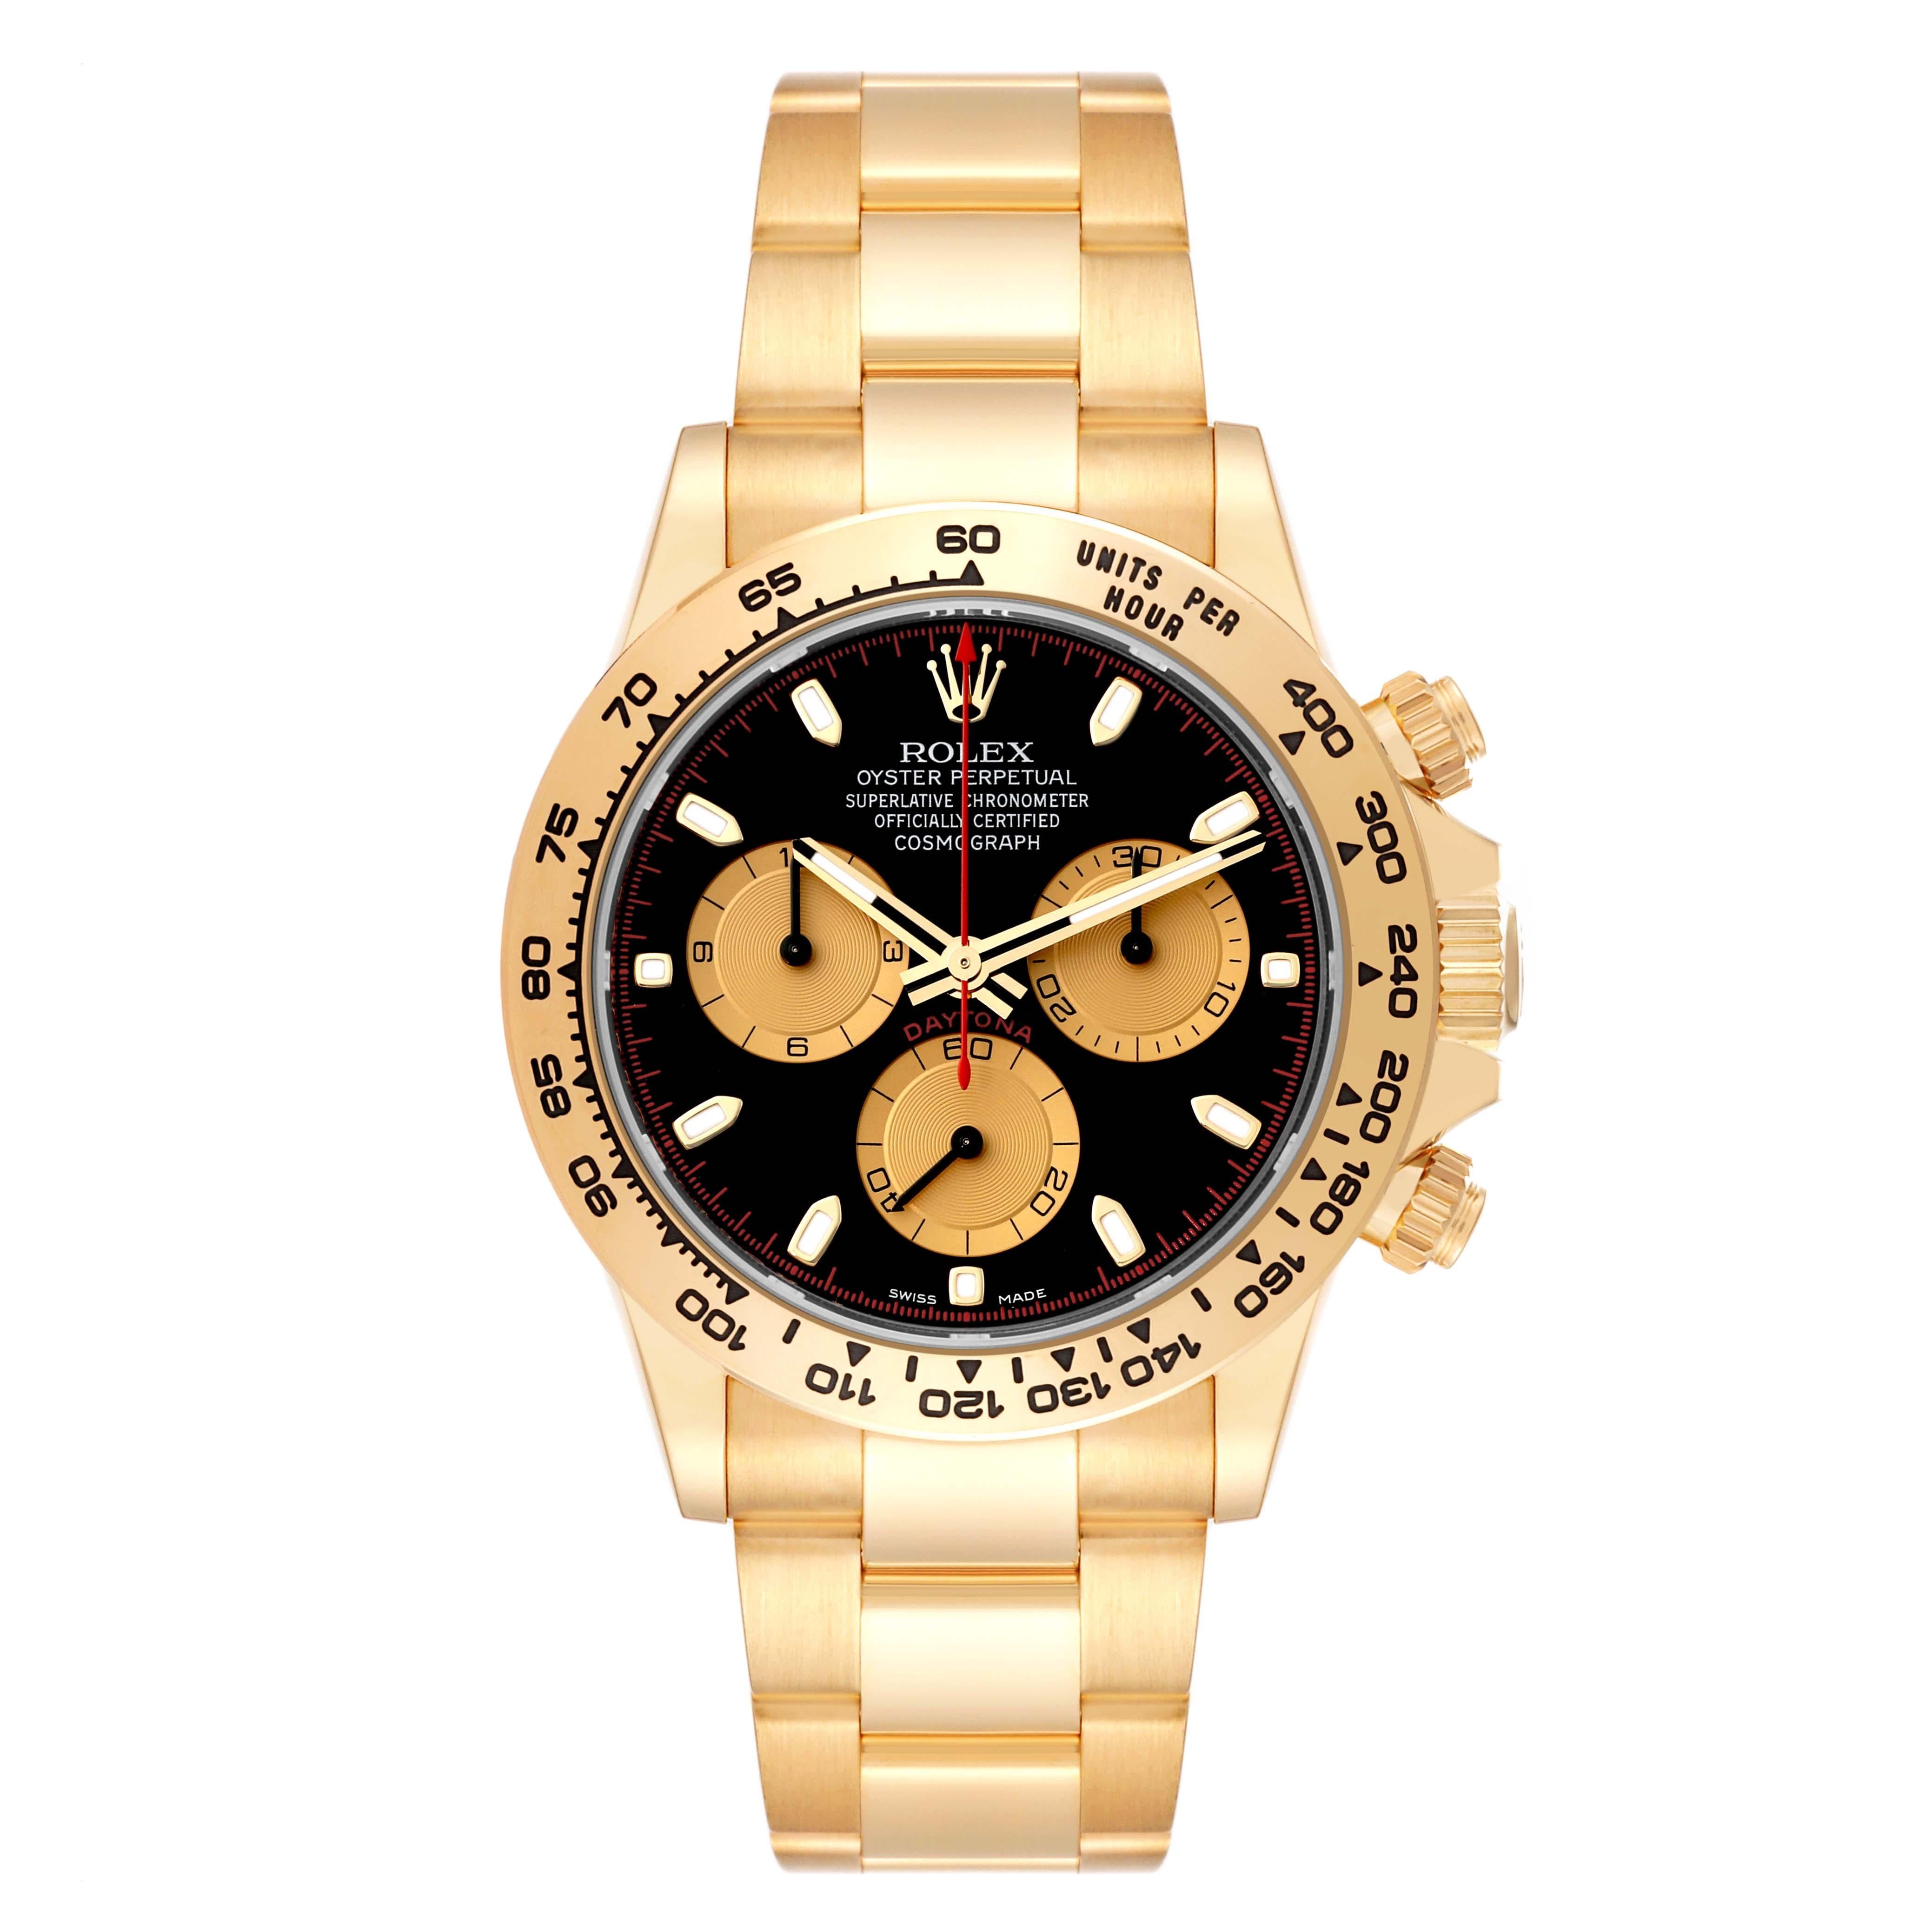 Rolex Daytona Black Dial Yellow Gold Mens Watch 116508 Box Card. Officially certified chronometer automatic self-winding chronograph movement. Rhodium-plated, 44 jewels, straight line lever escapement, monometallic balance adjusted to temperatures